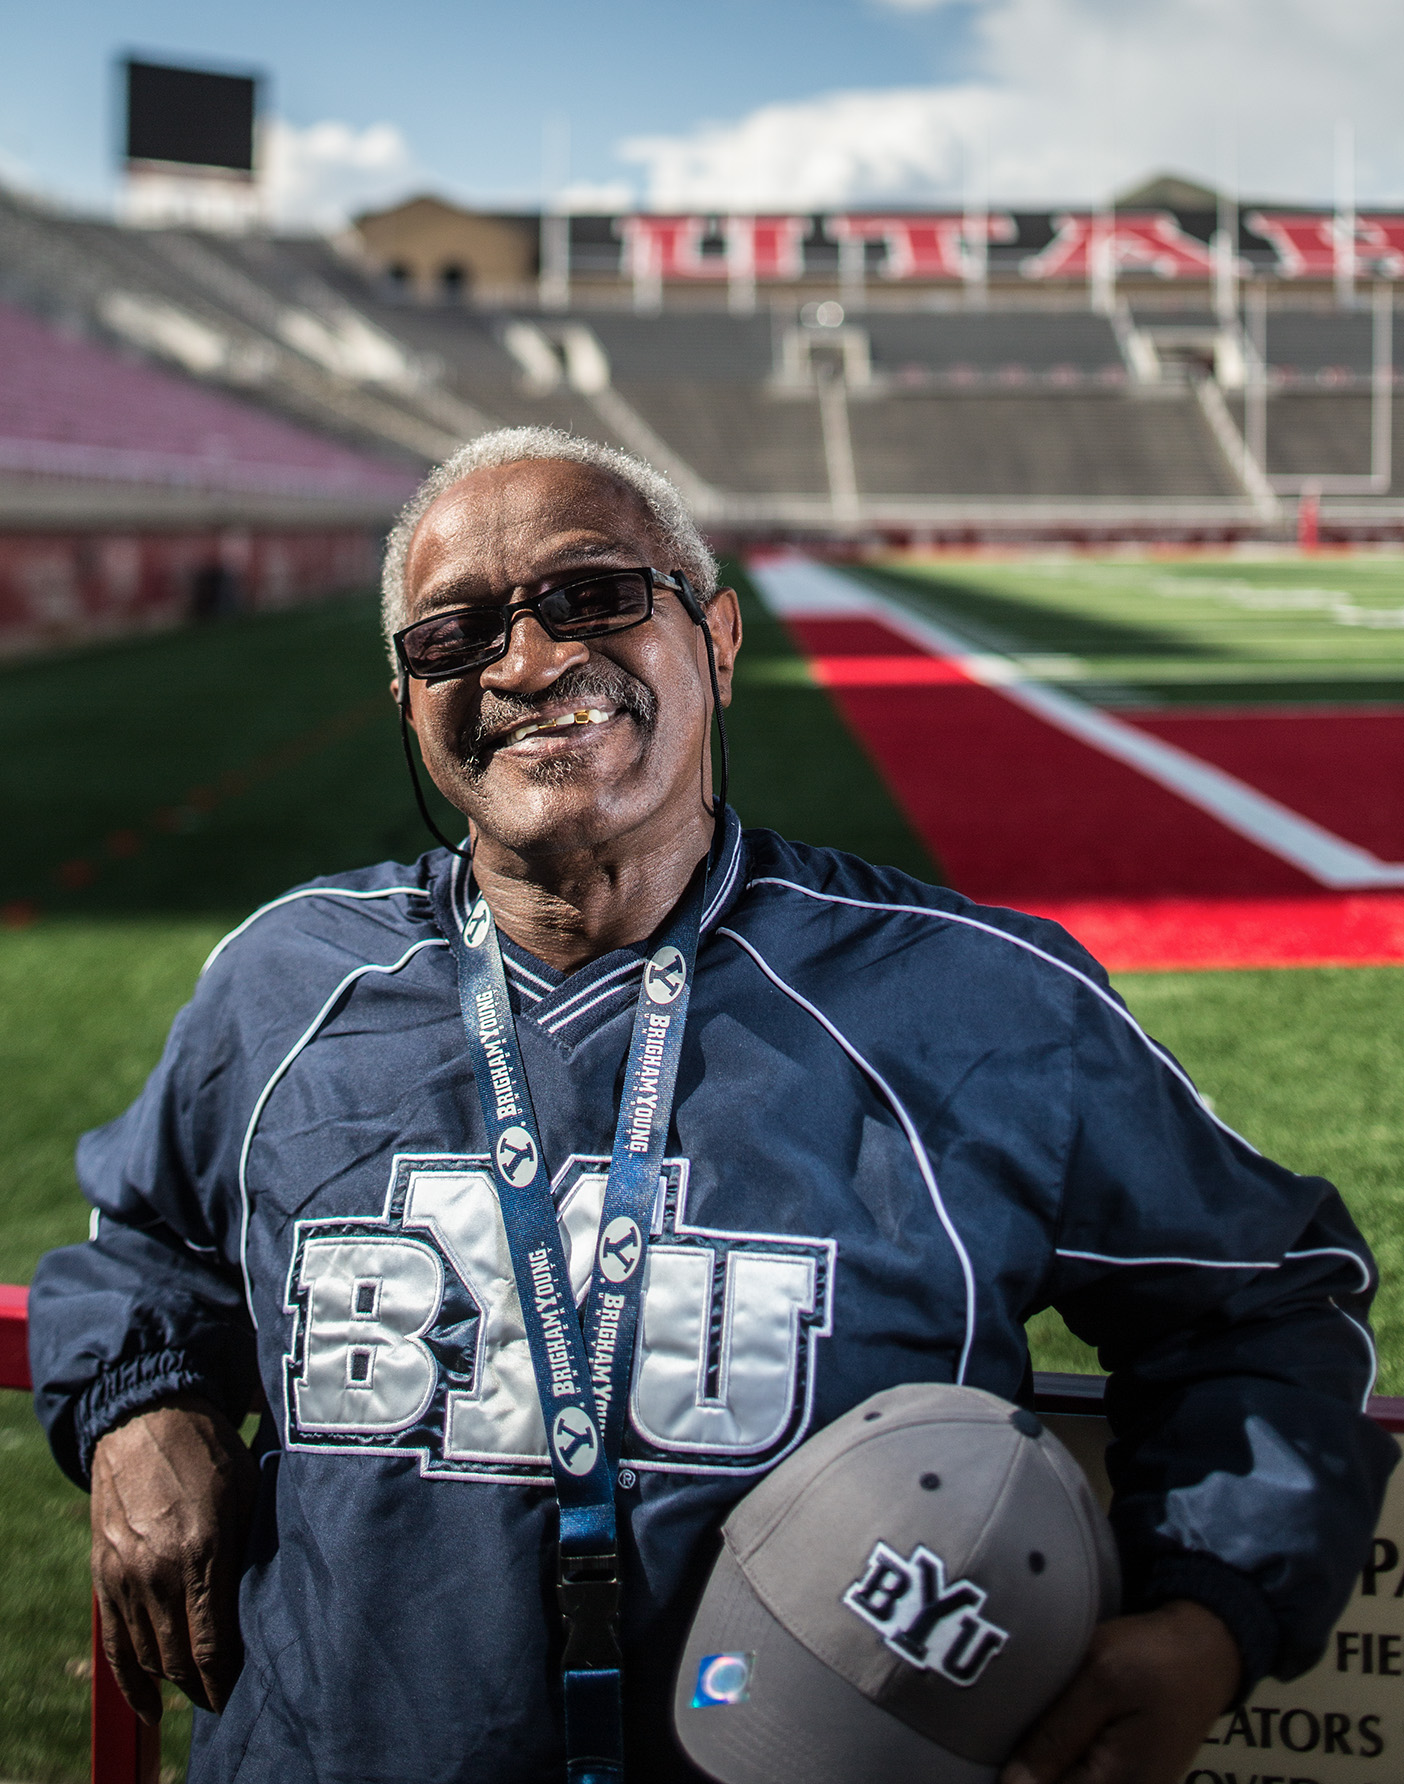 BYU super fan Gilbert WIlliams stands out at Utah's football stadium.